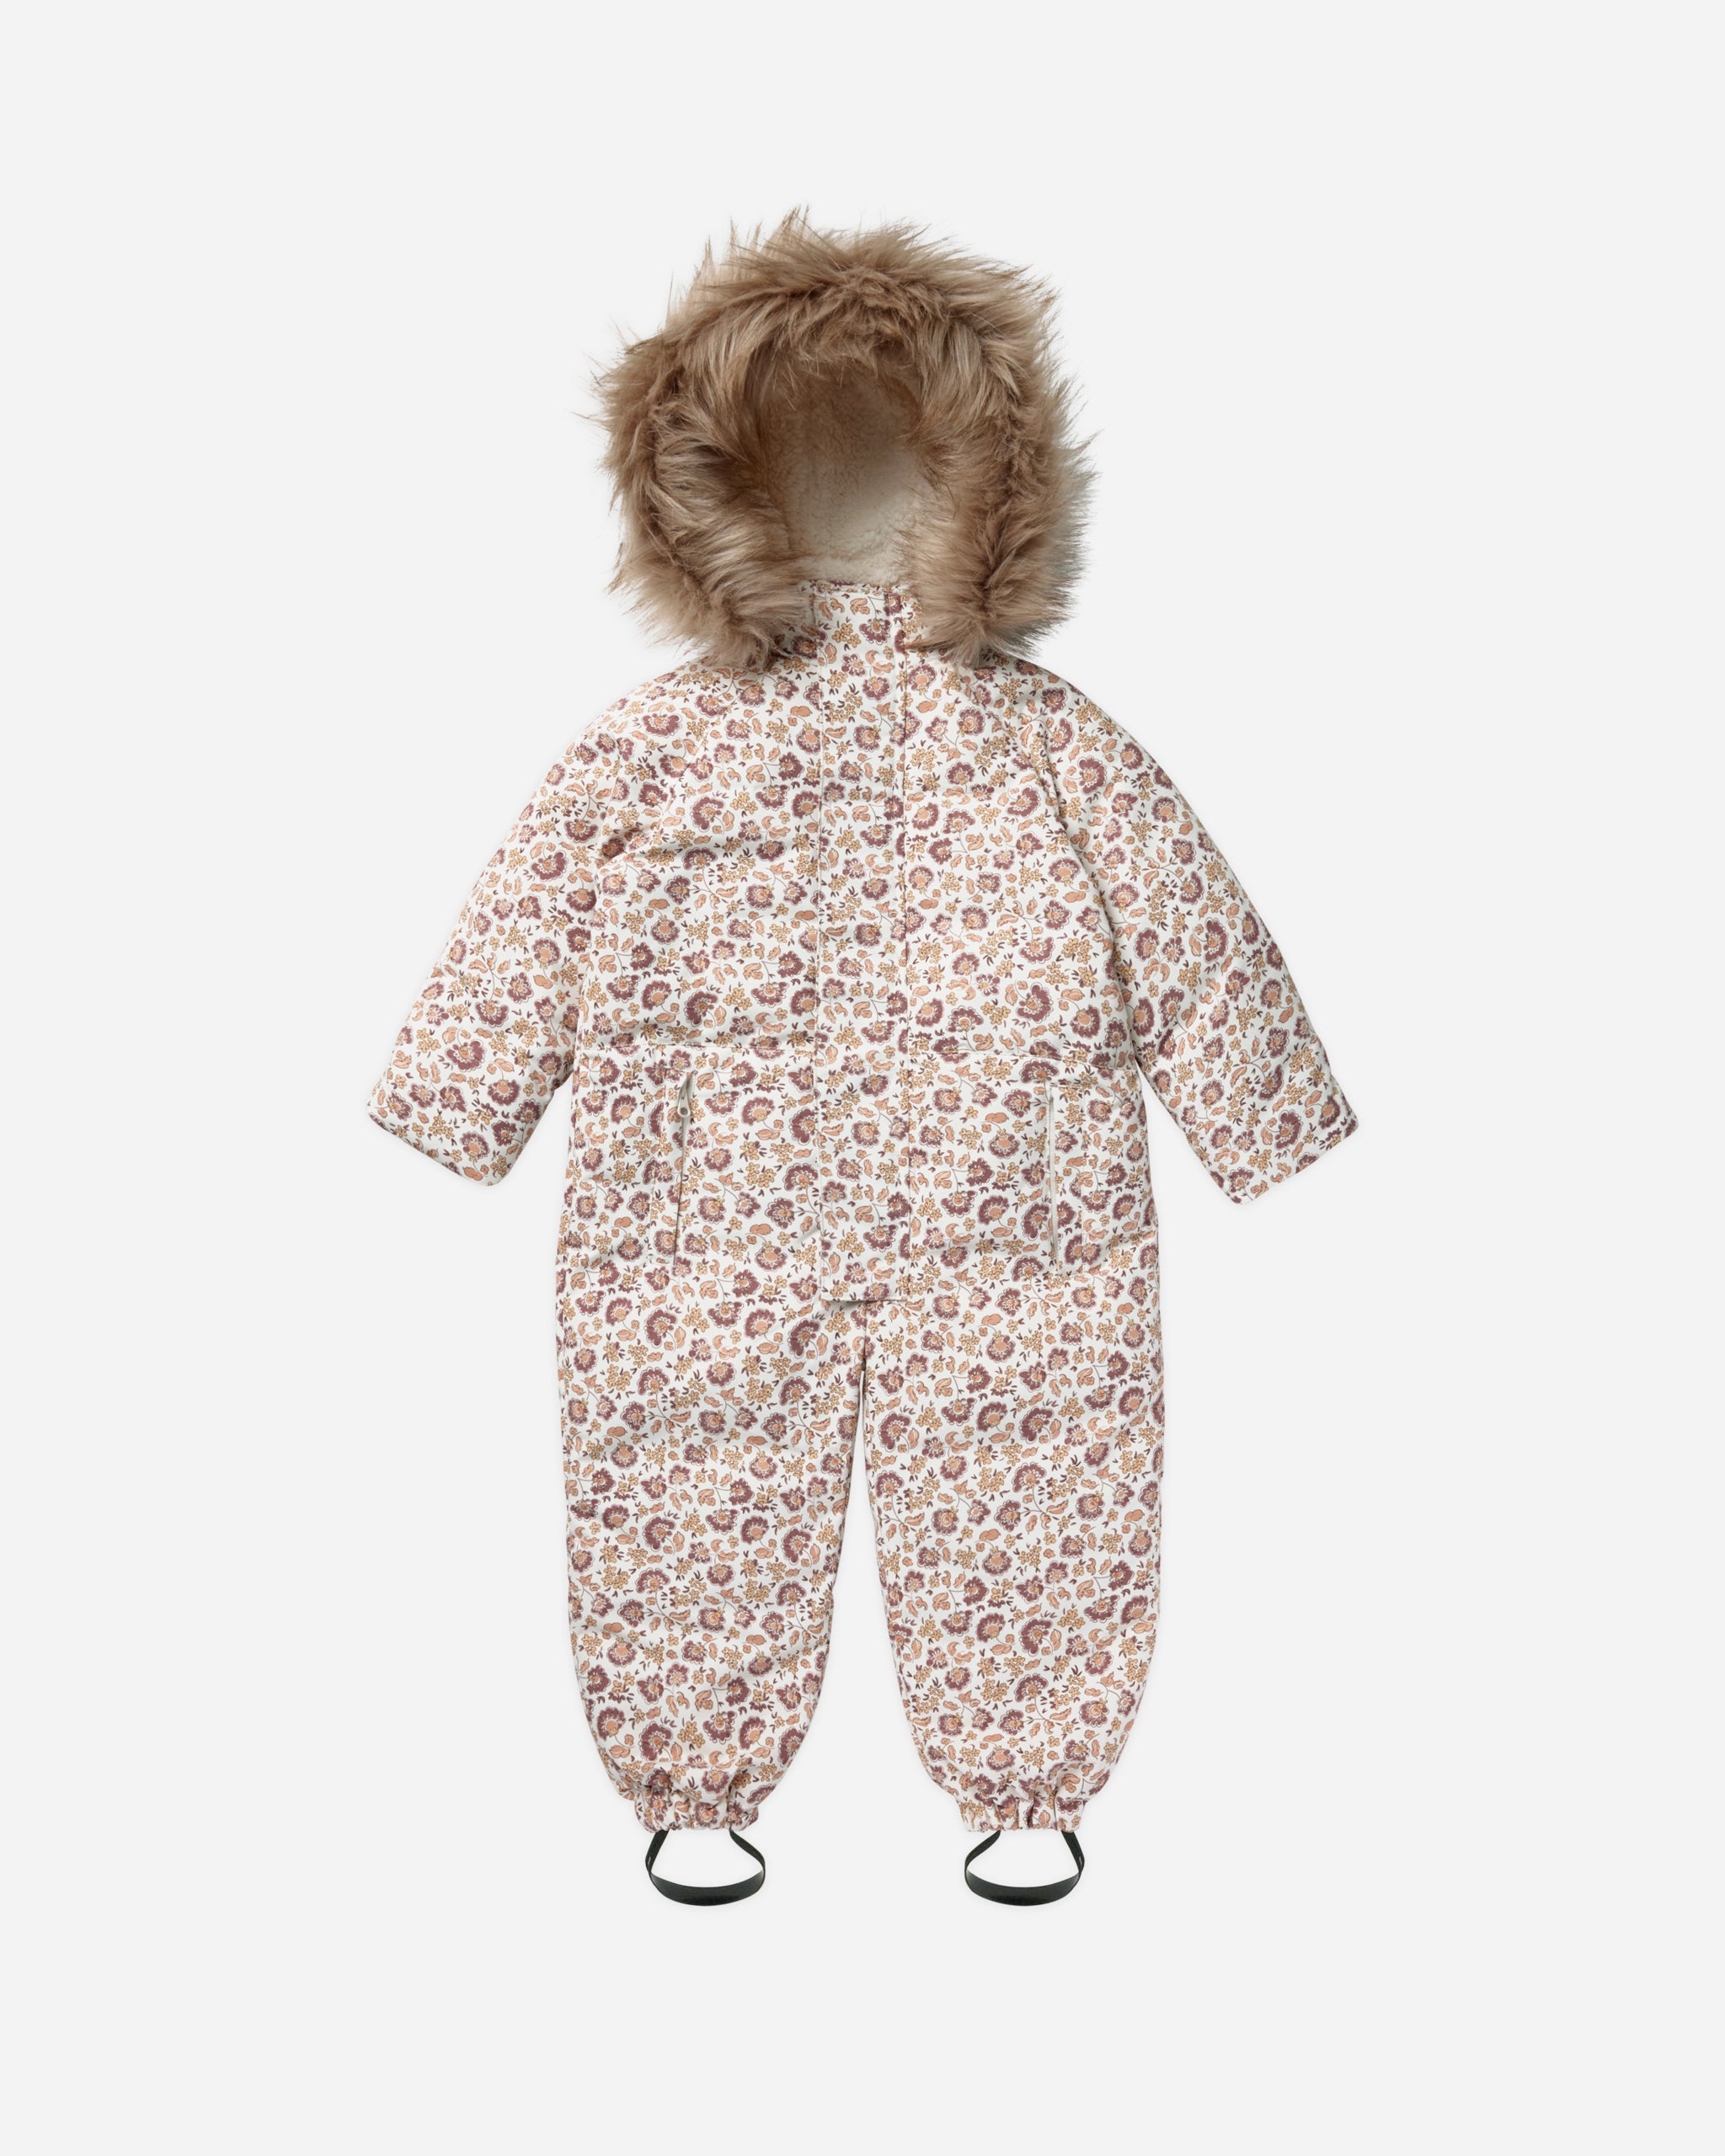 Ski Snowsuit | Magnolia - Rylee + Cru | Kids Clothes | Trendy Baby Clothes | Modern Infant Outfits |